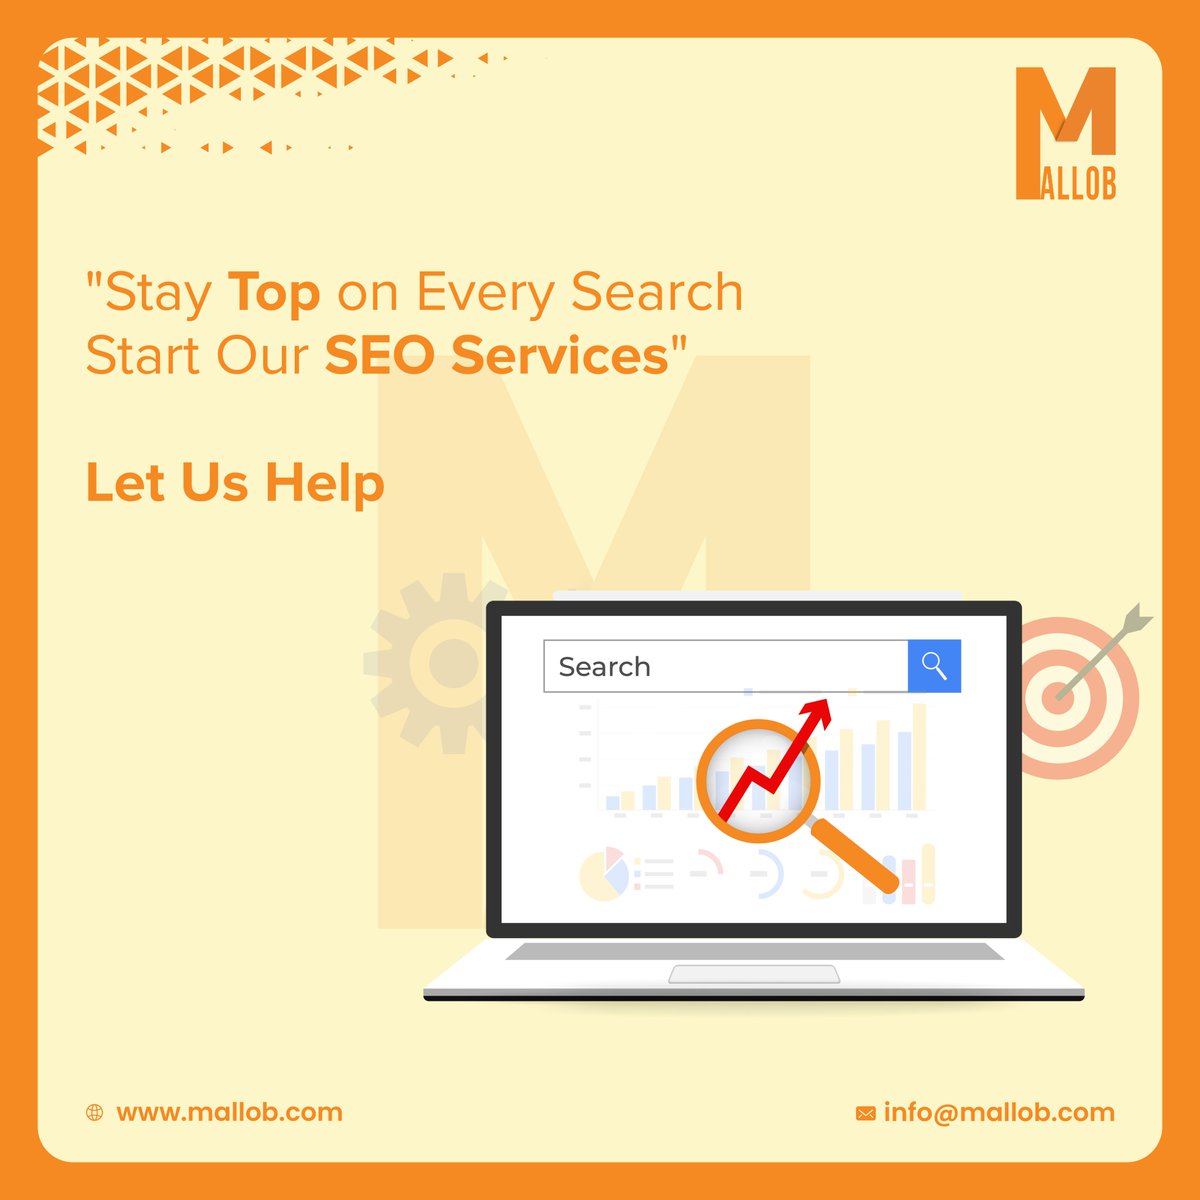 Take a bold step today and Let us assist you in maintaining a prominent presence in every search result through our exceptional SEO services.

Reach out to us now!

#digitalmarketingservices #SEOServices #SEOOnpage #SEO #SEOOffpage
#mallob
#mallobgroup